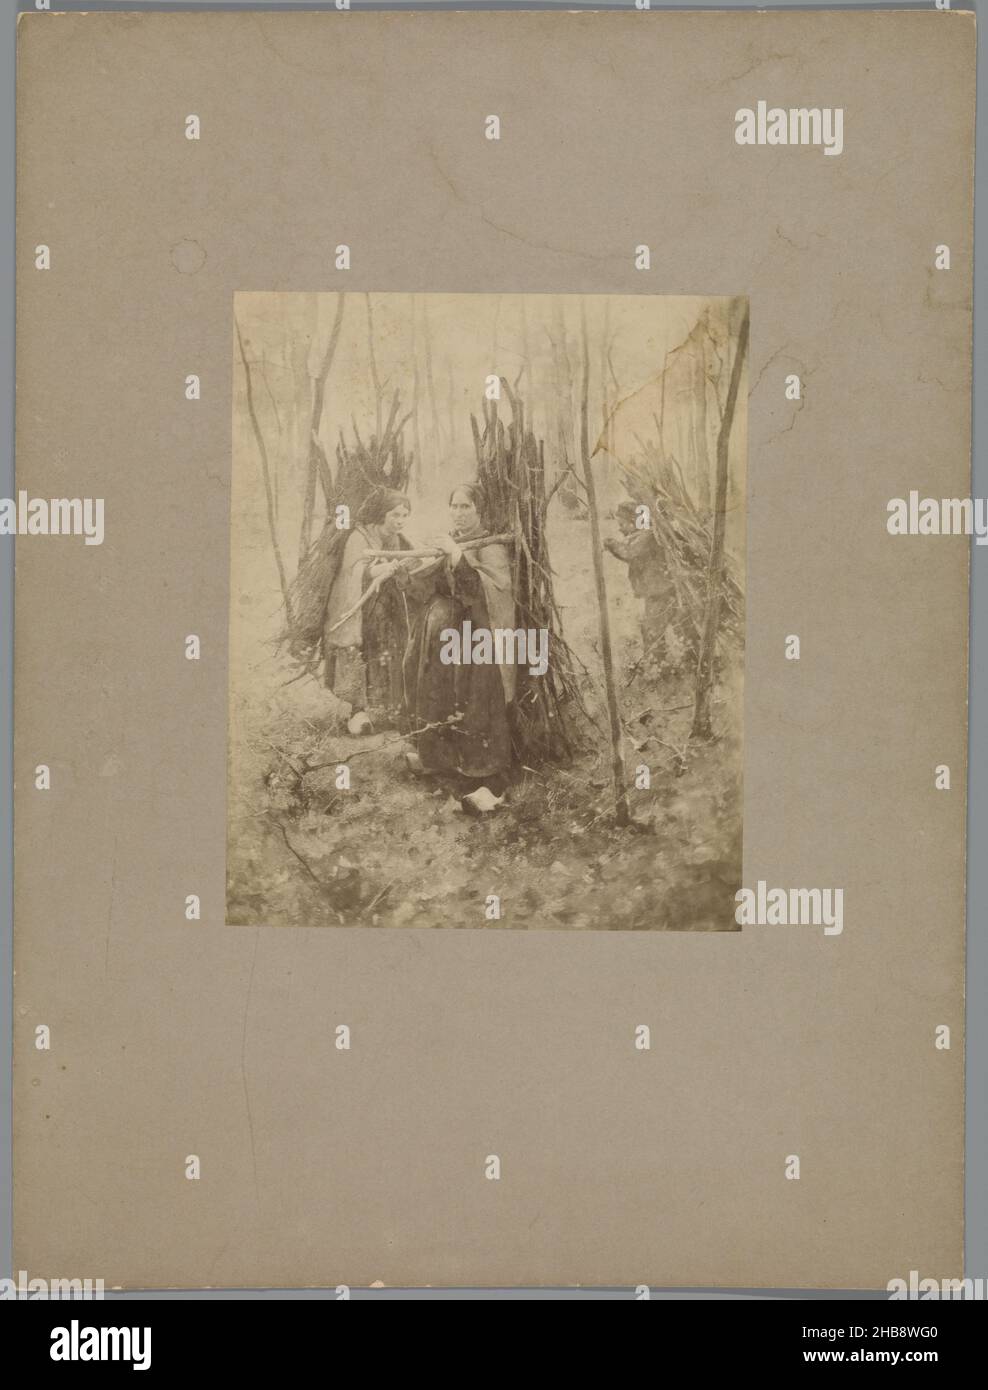 Reproduction after a painting by Willem Witsen of two women and a child with branches on their backs, anonymous, Willem Witsen, Netherlands, c. 1860 - c. 1915, paper, cardboard, height 212 mm × width 172 mmheight 427 mm × width 320 mm Stock Photo